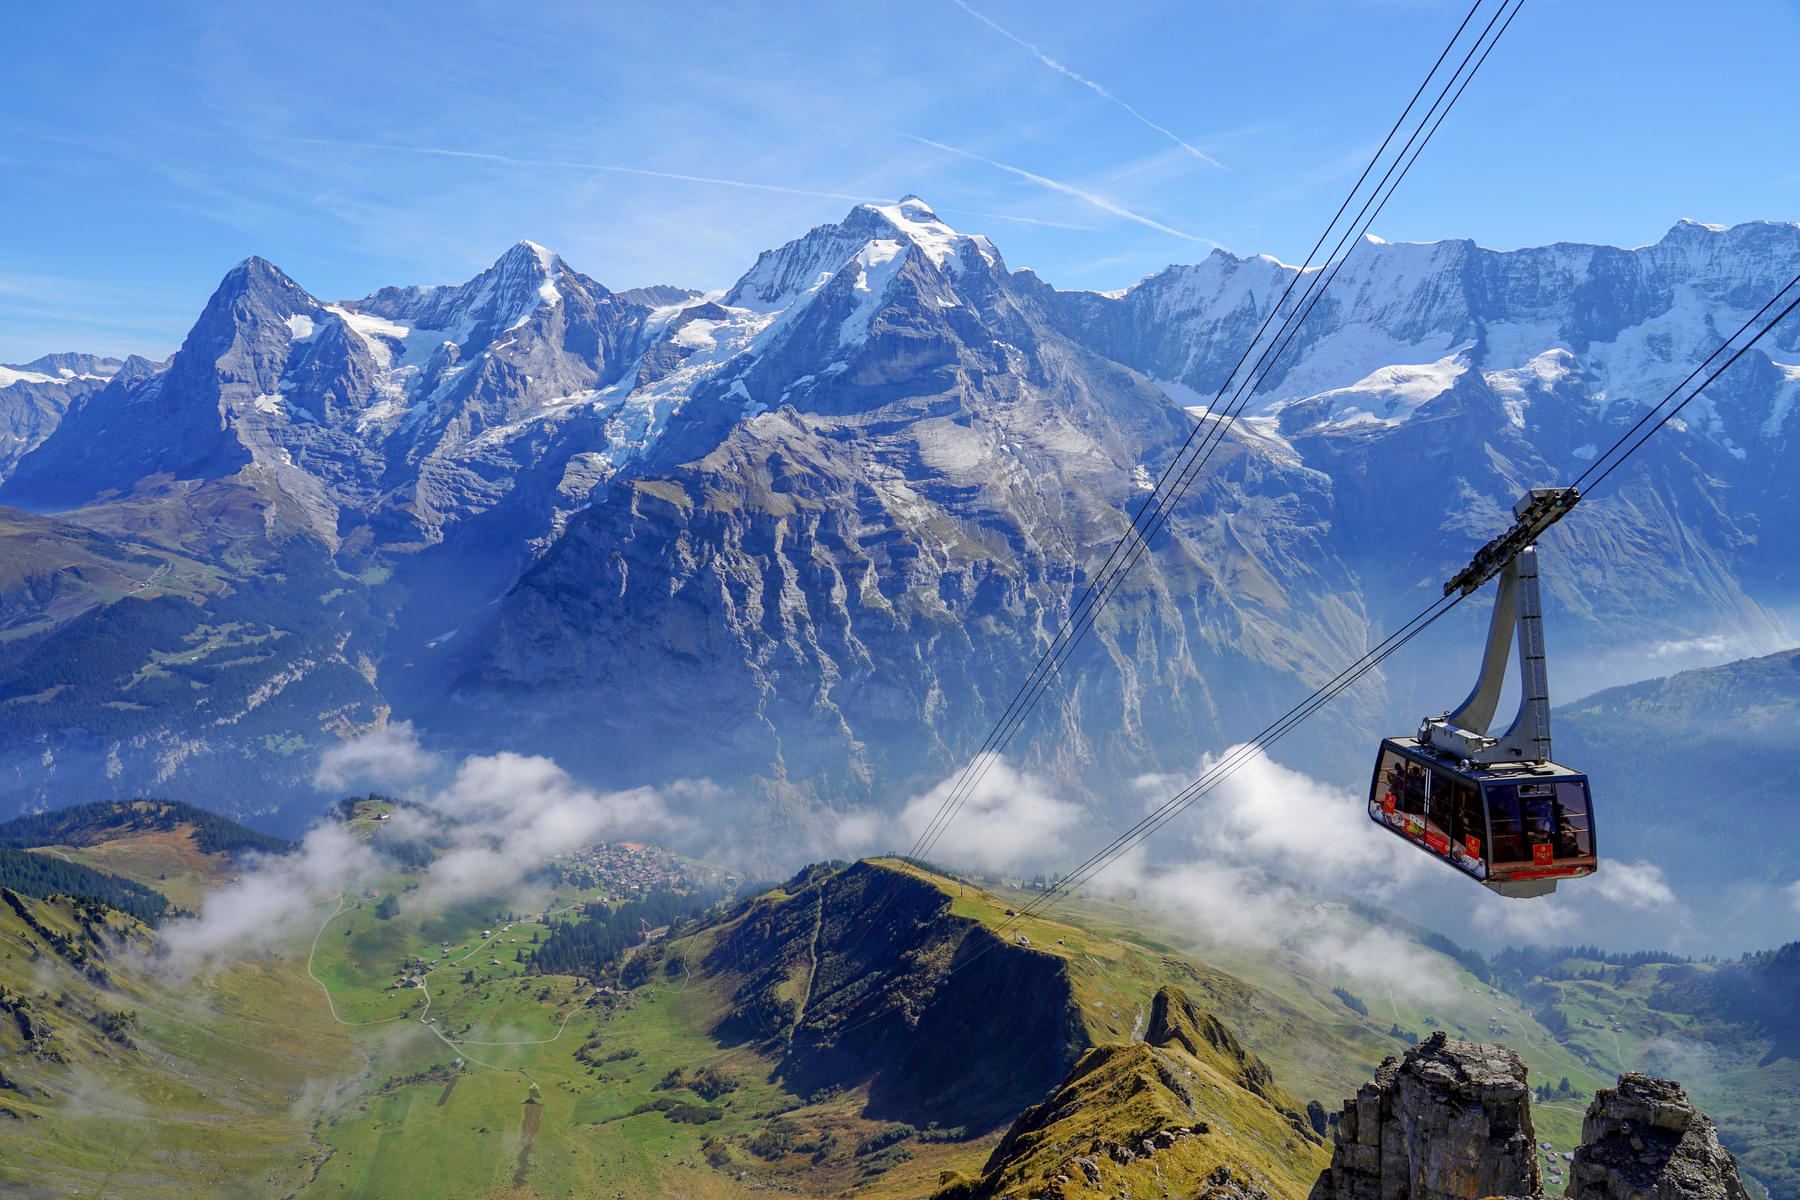 Ride on a cable car from a good height